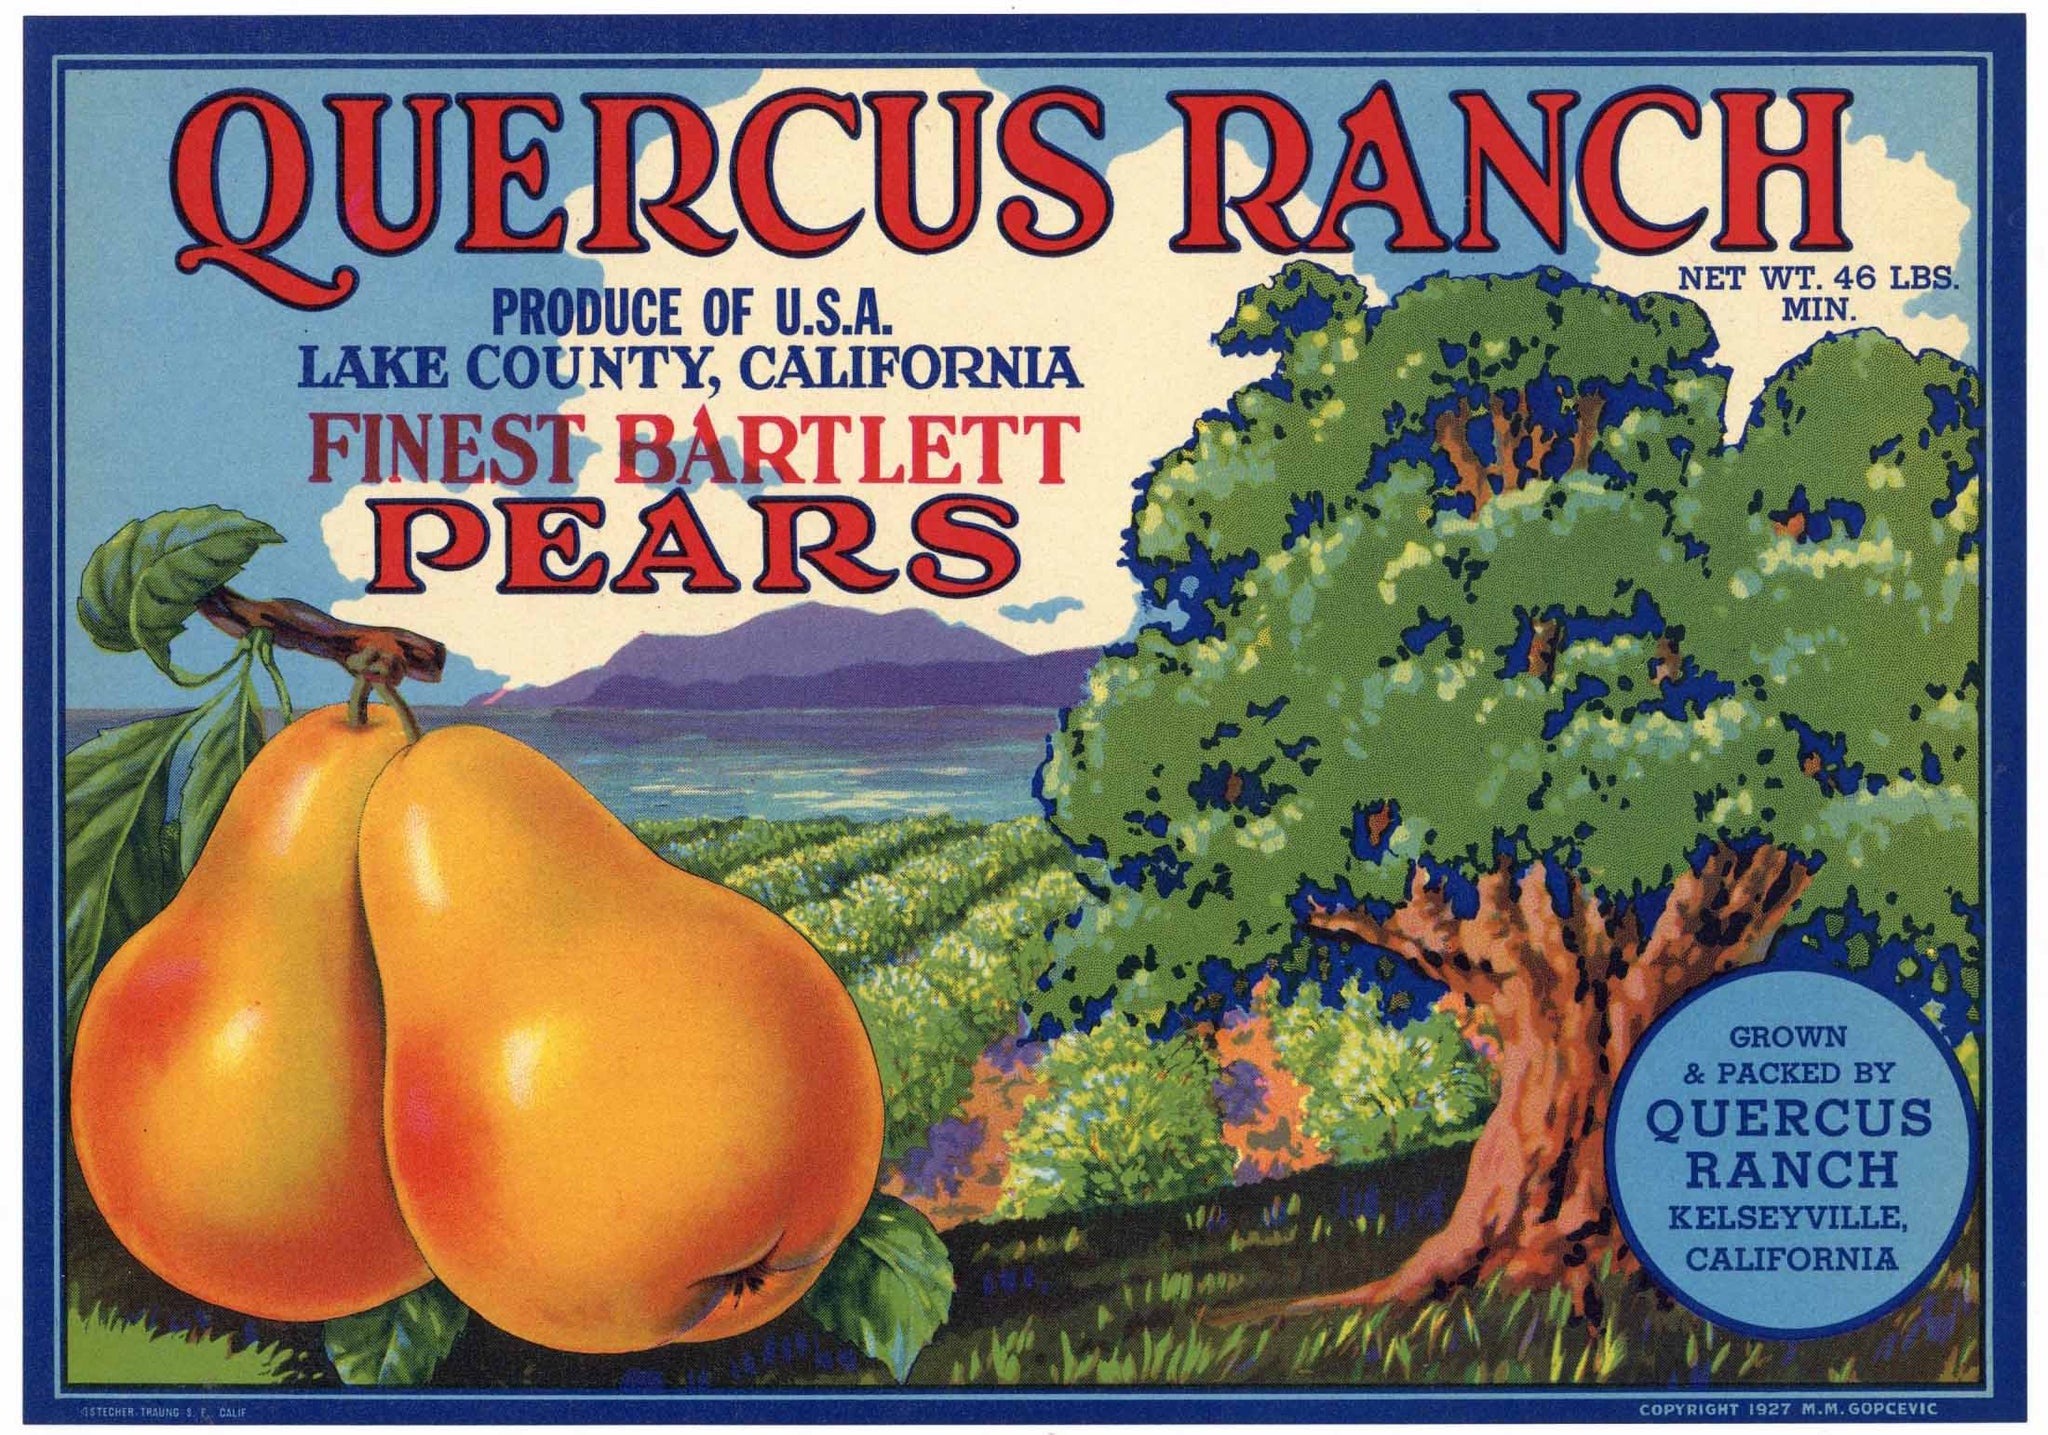 Quercus Ranch Brand Vintage Lake County California Pear Crate Label, 46 lbs